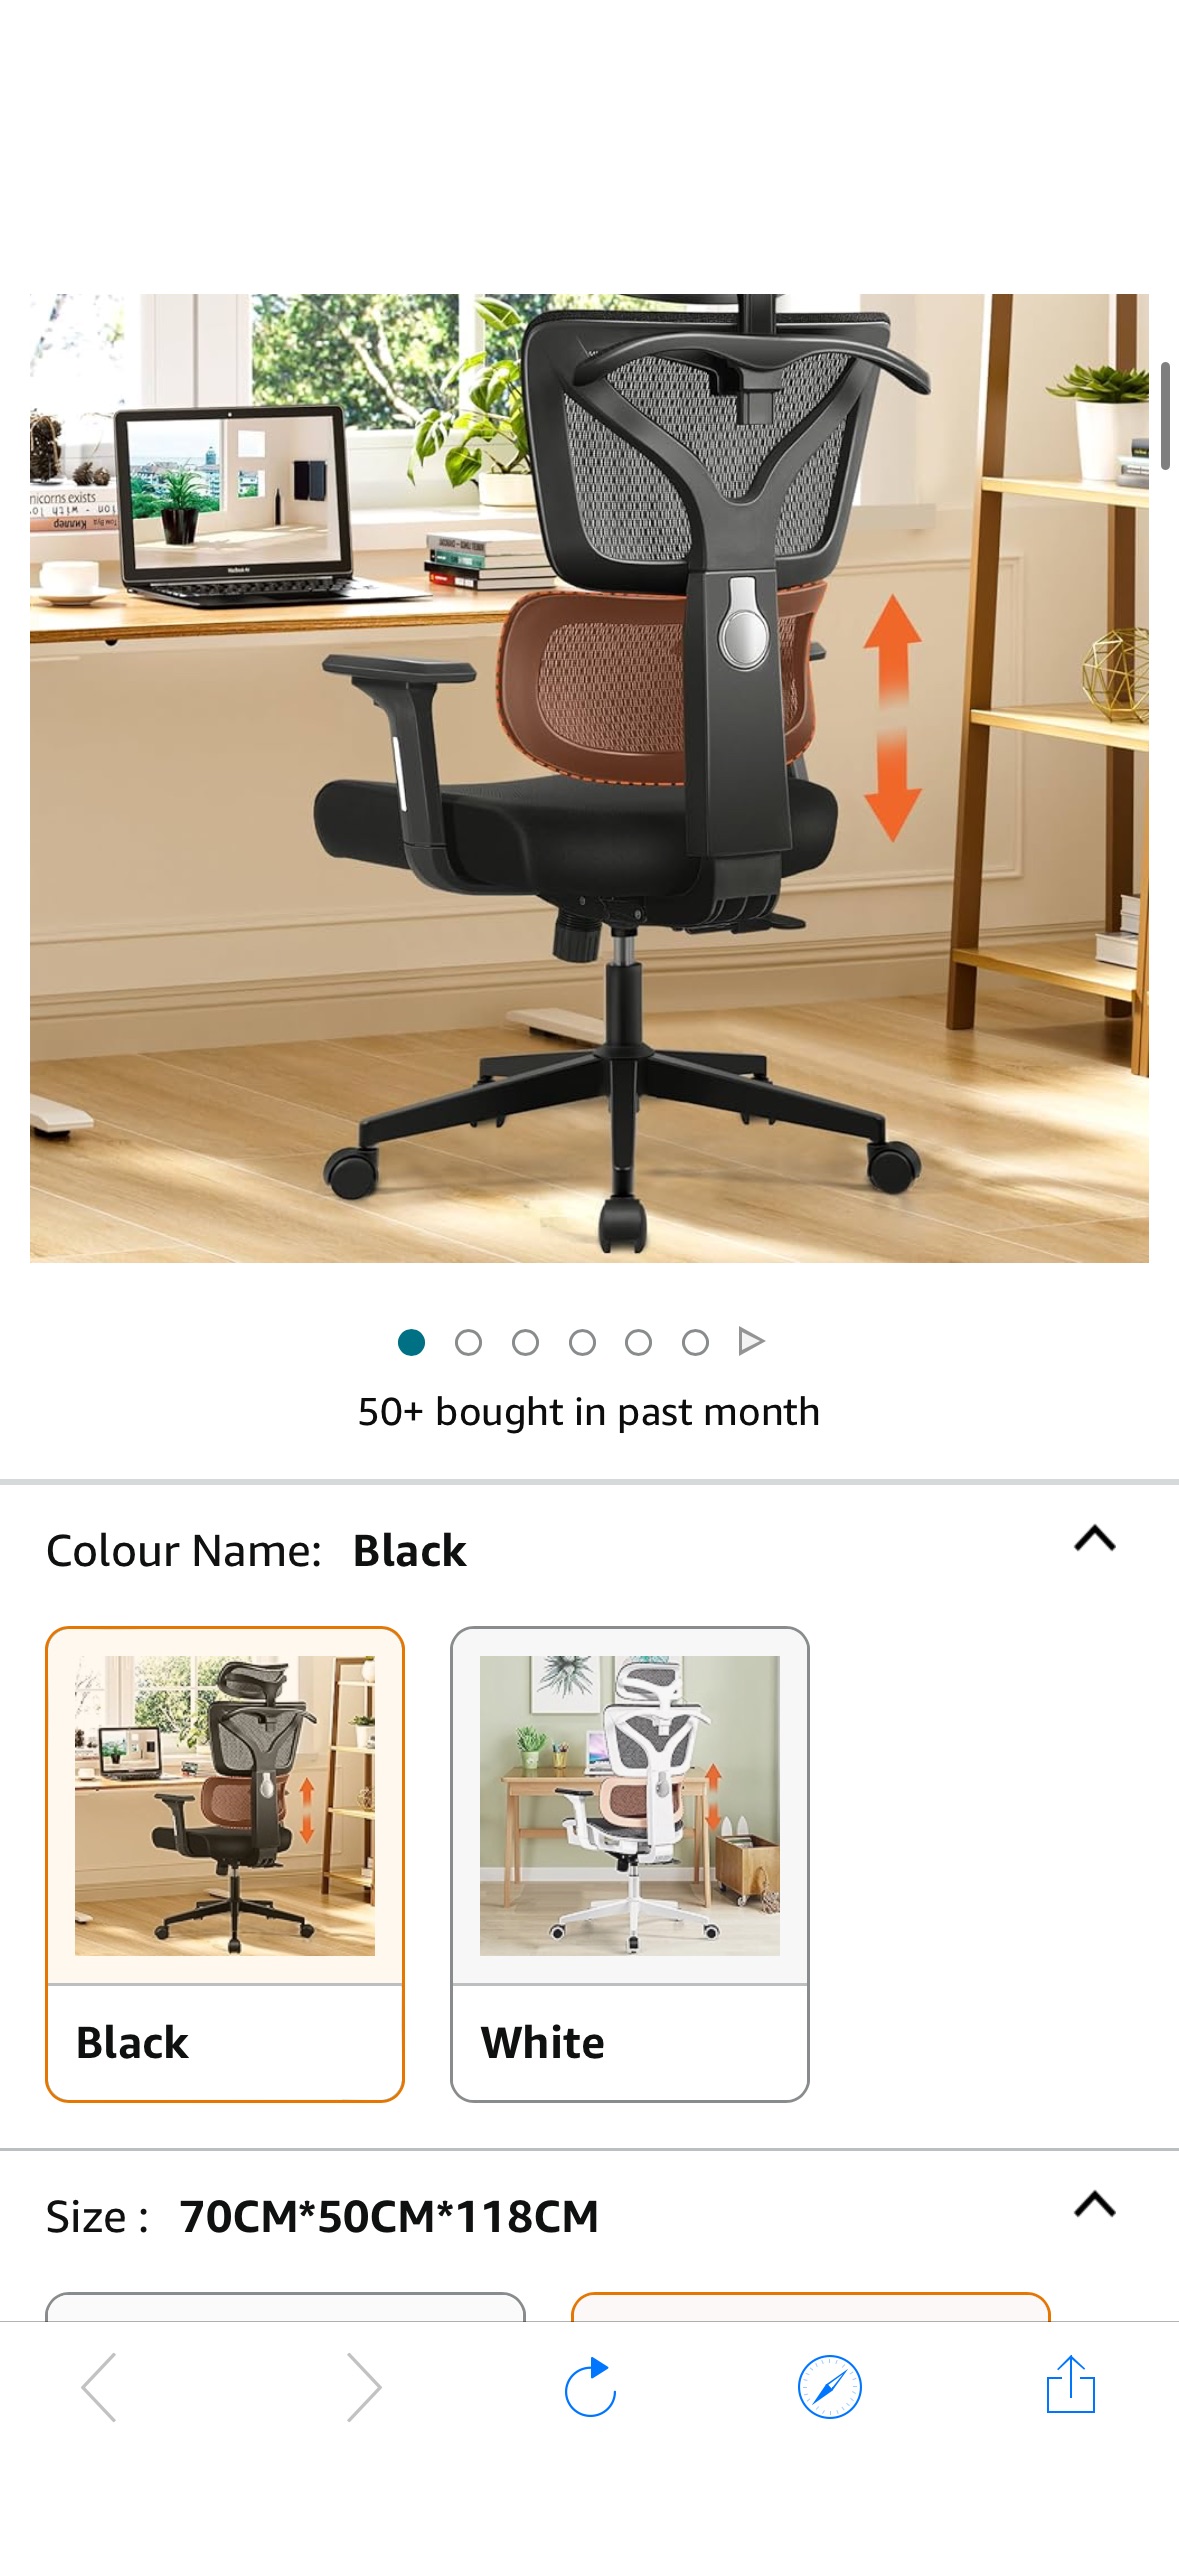 Razzor Office Chair Ergonomic Computer Desk Chair Upgrade Adjustable Lumbar Support, Breathable Mesh Gaming Chair with Adjustable 3D Arms and Headrest Swivel High Back Chairs : Amazon.ca: Home